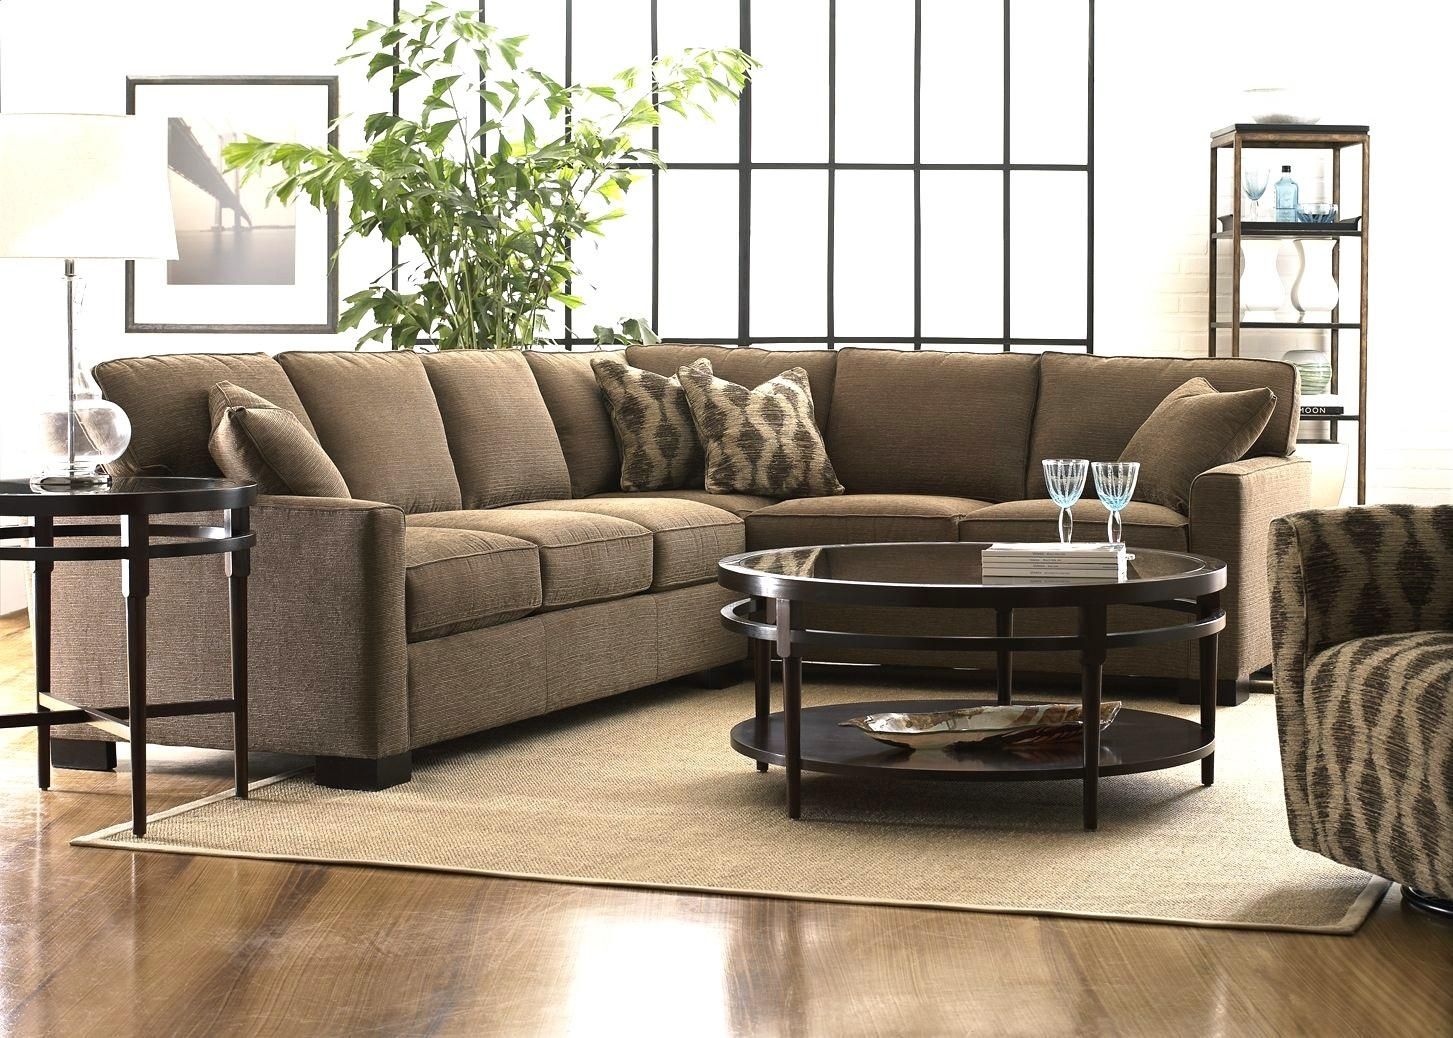 Outstanding Sectional Sofa For Small Space 14 About Remodel Regarding Sectional Small Space (View 18 of 20)